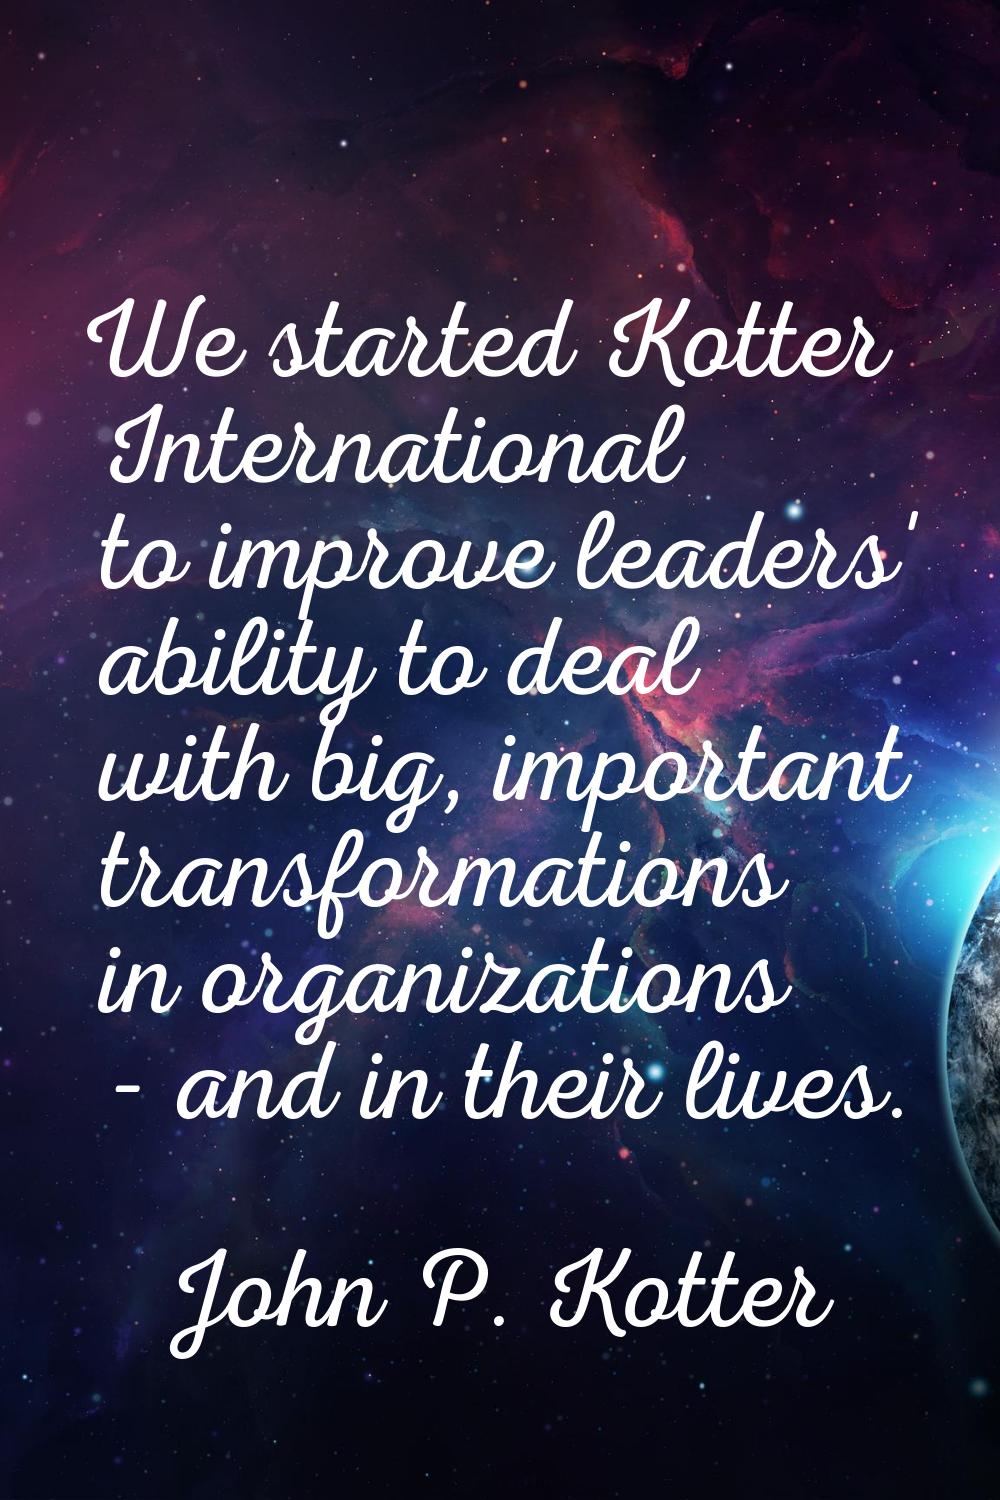 We started Kotter International to improve leaders' ability to deal with big, important transformat